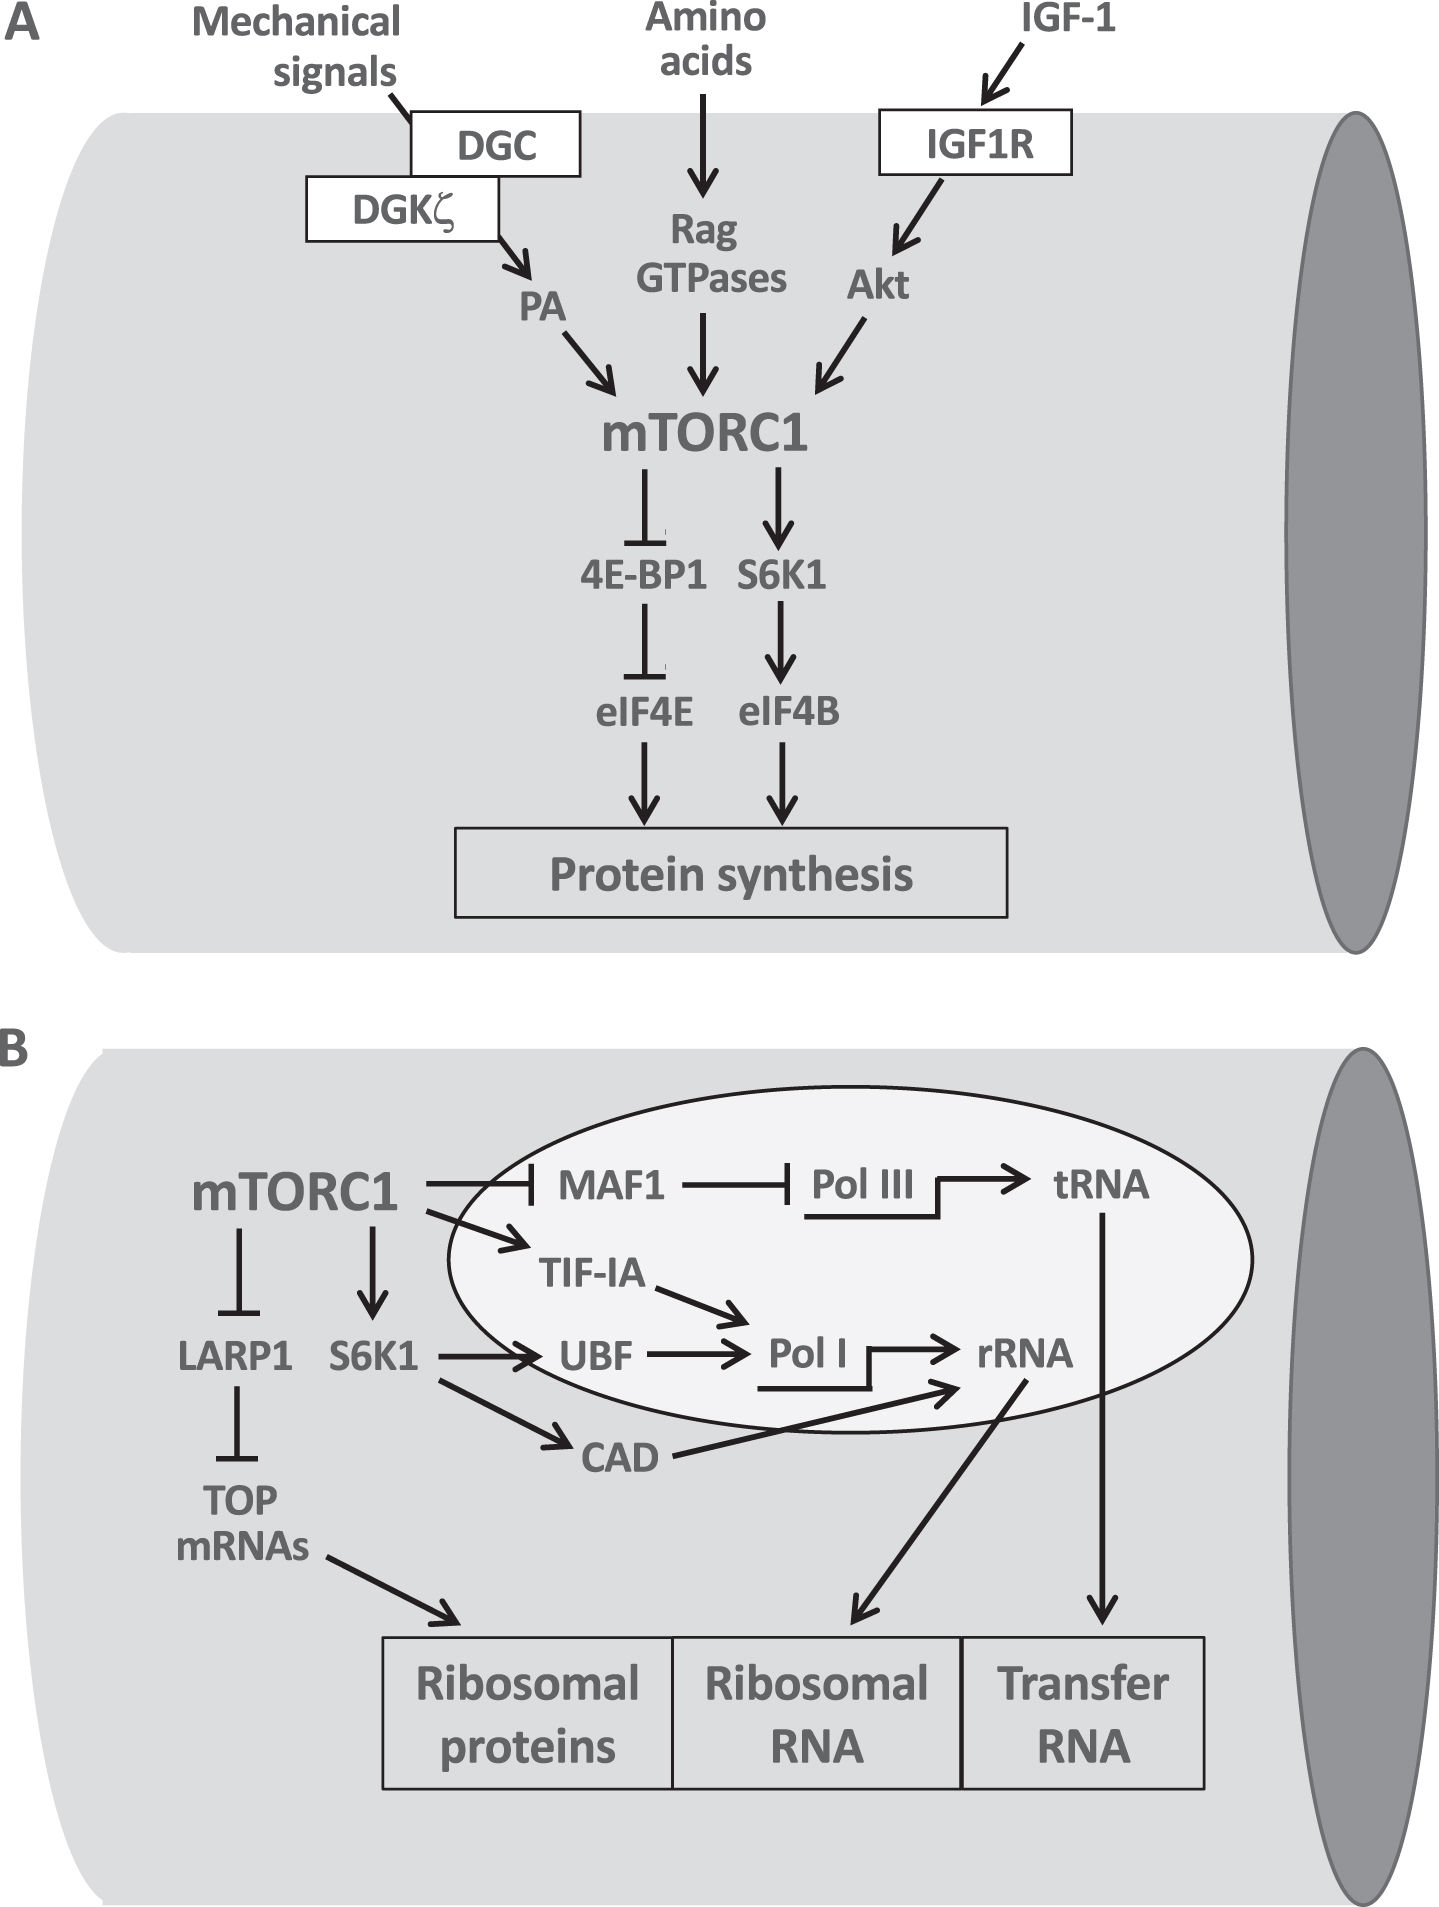 The central role of mTORC1 in the translational and transcriptional control of protein synthesis. A. mTORC1 integrates the pro-hypertrophic input from growth factors, amino acids and mechanical signals. mTORC1 stimulates protein synthesis by acting at the translational level through phosphorylation of 4E-BP1 and S6K1 which in turn activate initiation factors eIF4E and eIF4B. B. mTORC1 controls ribosomal biogenesis at the transcriptional level by stimulating PolI-mediated synthesis of ribosomal RNA (rRNA) via TIF-1A and Pol III-mediated synthesis of transfer RNA (tRNA) via MAF1. S6K1 also activates PolI through UBF and stimulates pyrimidine biosynthesis required for rRNA synthesis by CAD phosphorylation. The translational activation of TOP mRNAs, controlled by mTORC1 via LARP1, leads to the formation of ribosomal proteins. See text for further details.